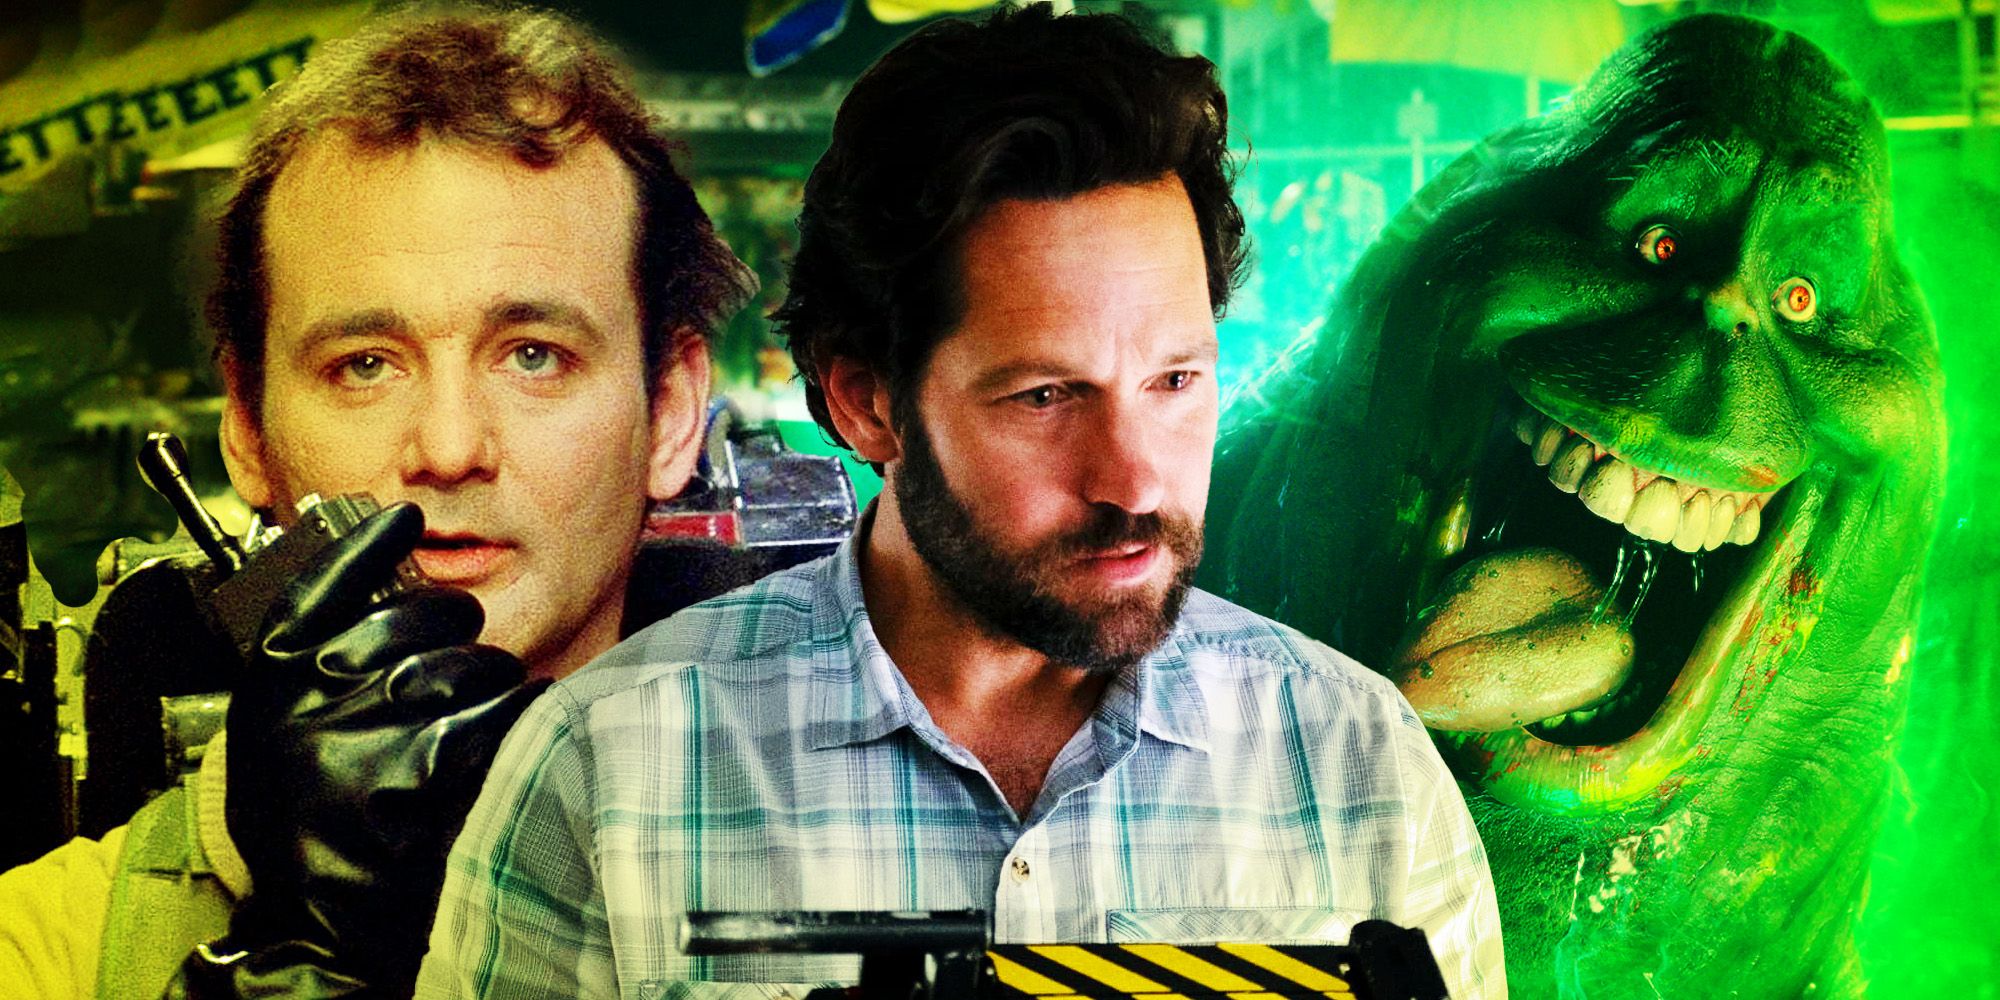 Ghostbusters characters collage with Bill Murray, Paul Rudd and Slimer